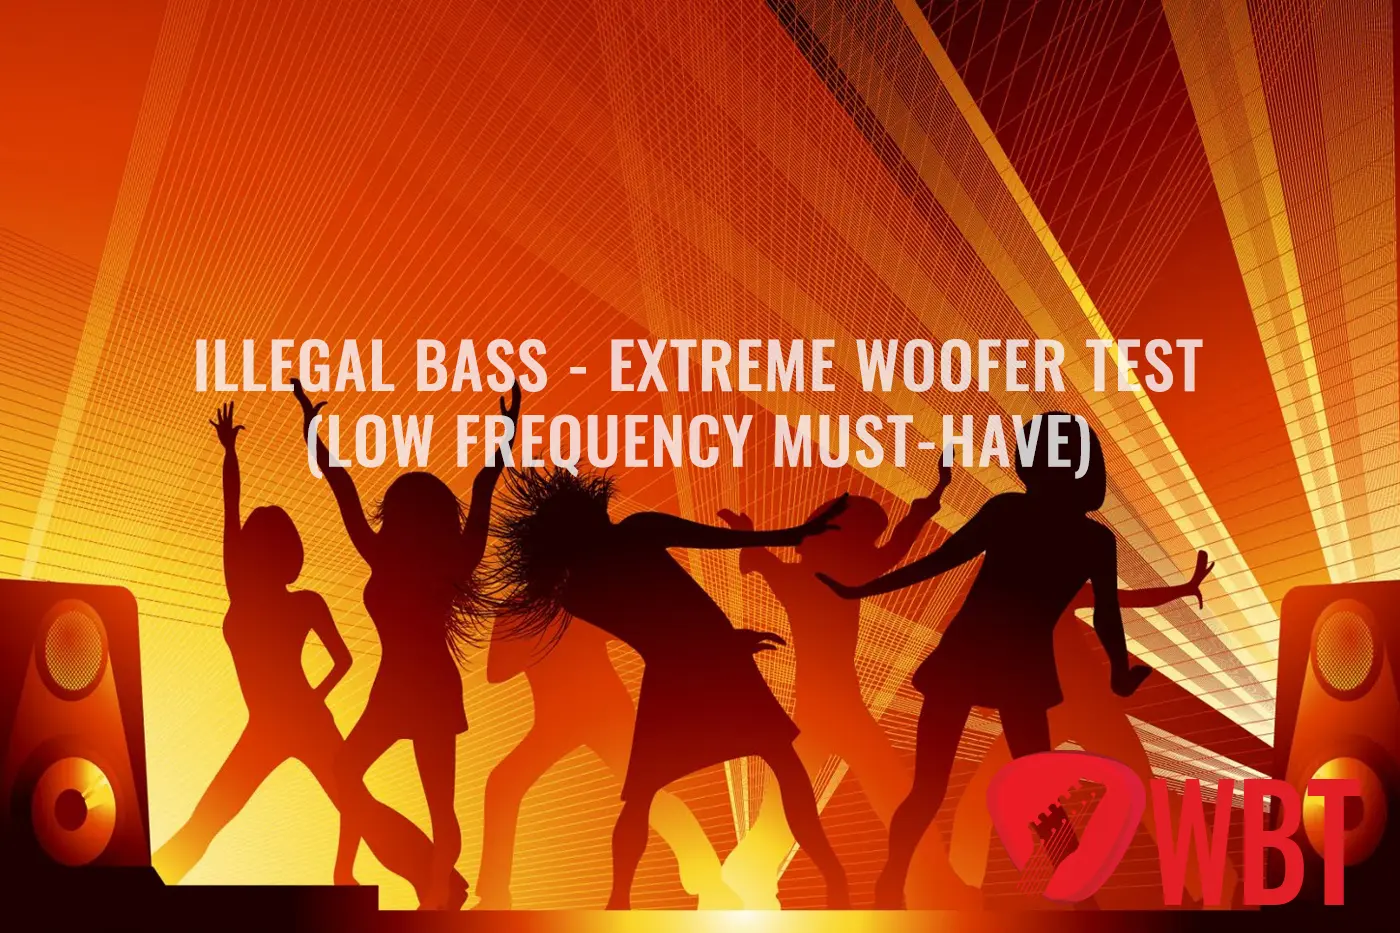 Illegal Bass - Extreme Woofer Test (Low Frequency Must-Have)